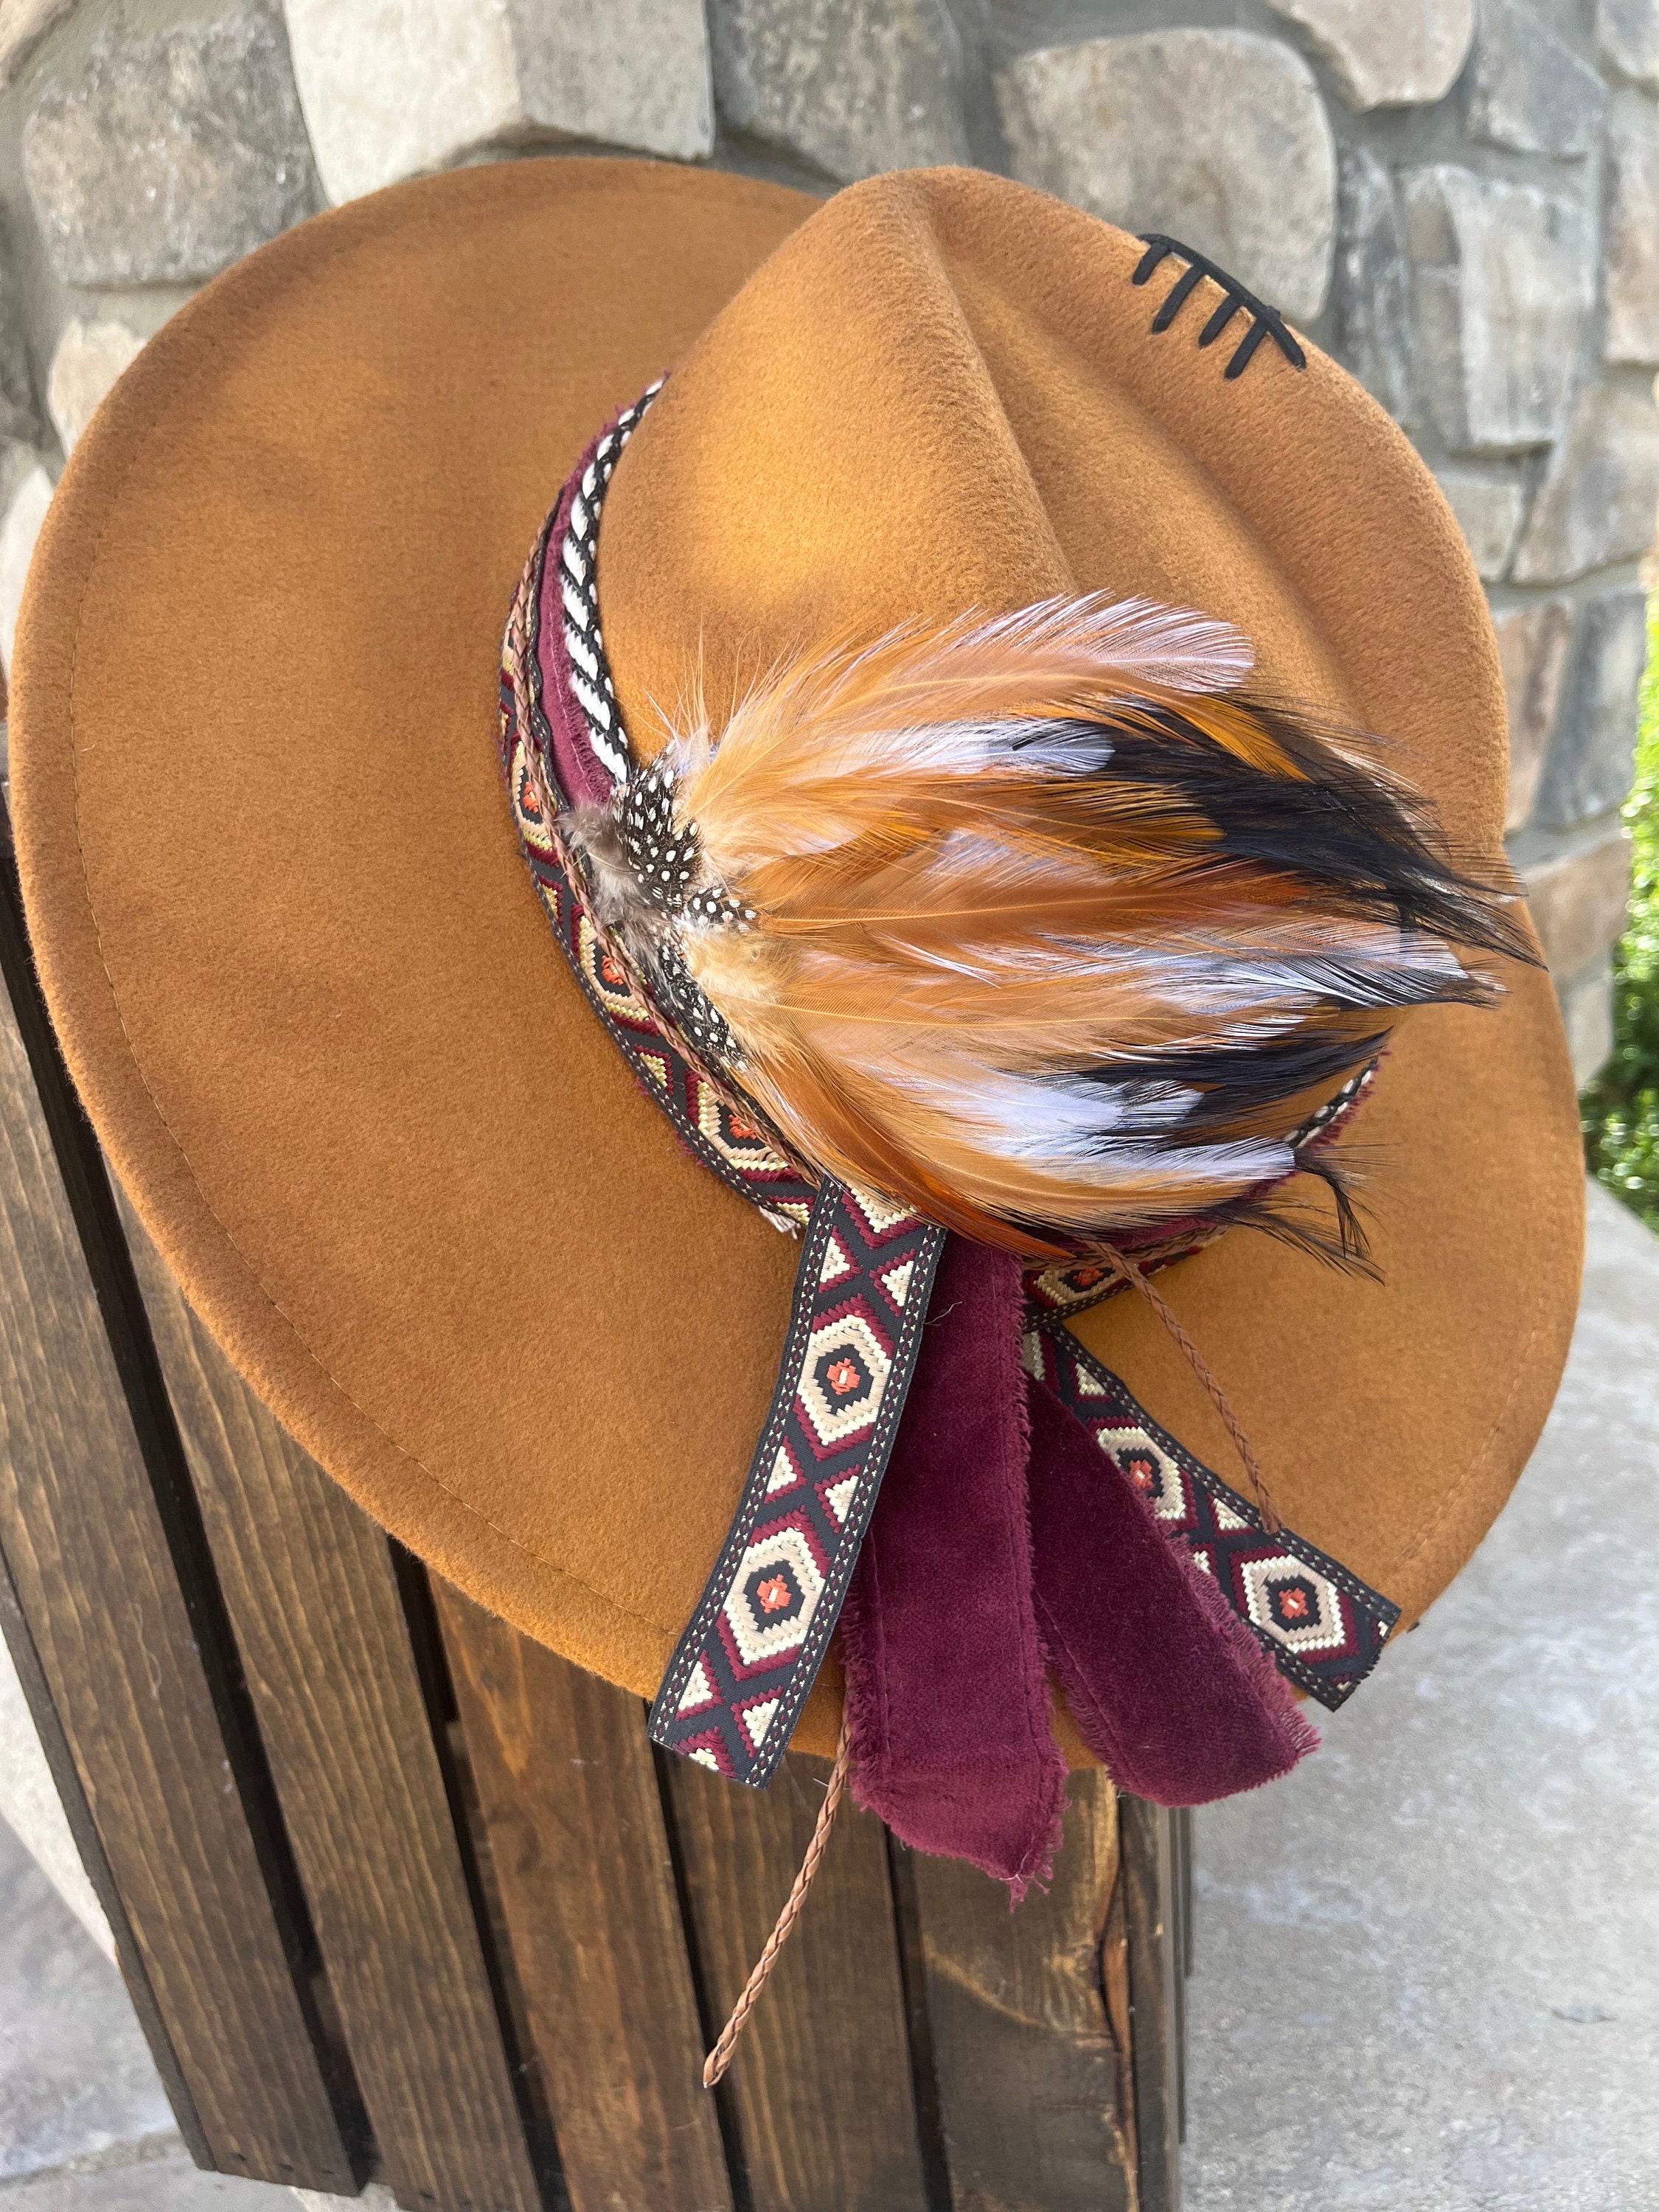 FEATHER SAVER, Hat Feather Tie, Custom Painted Leather Concho Feather  Saver, Western Retro Hat Accessories, Art, Attach Feather to Hat 